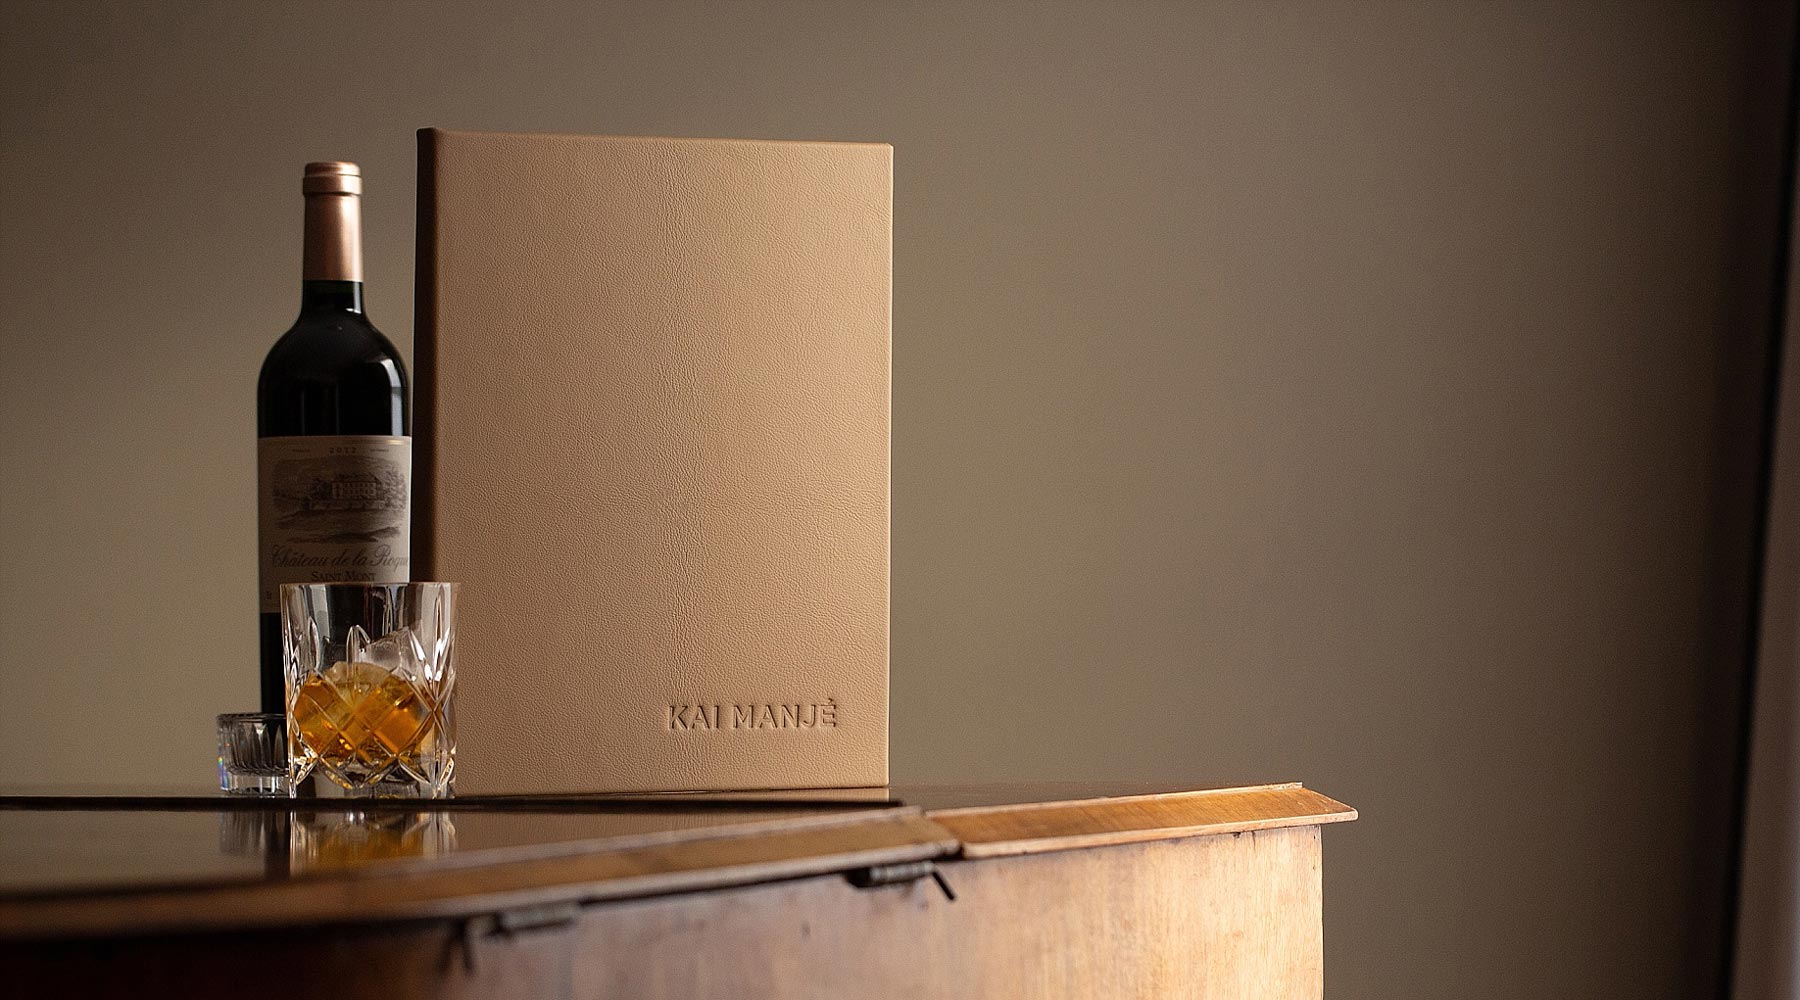 Menu cover luxury genuine leather bound and embossed menu cover sitting on piano with glass and bottle